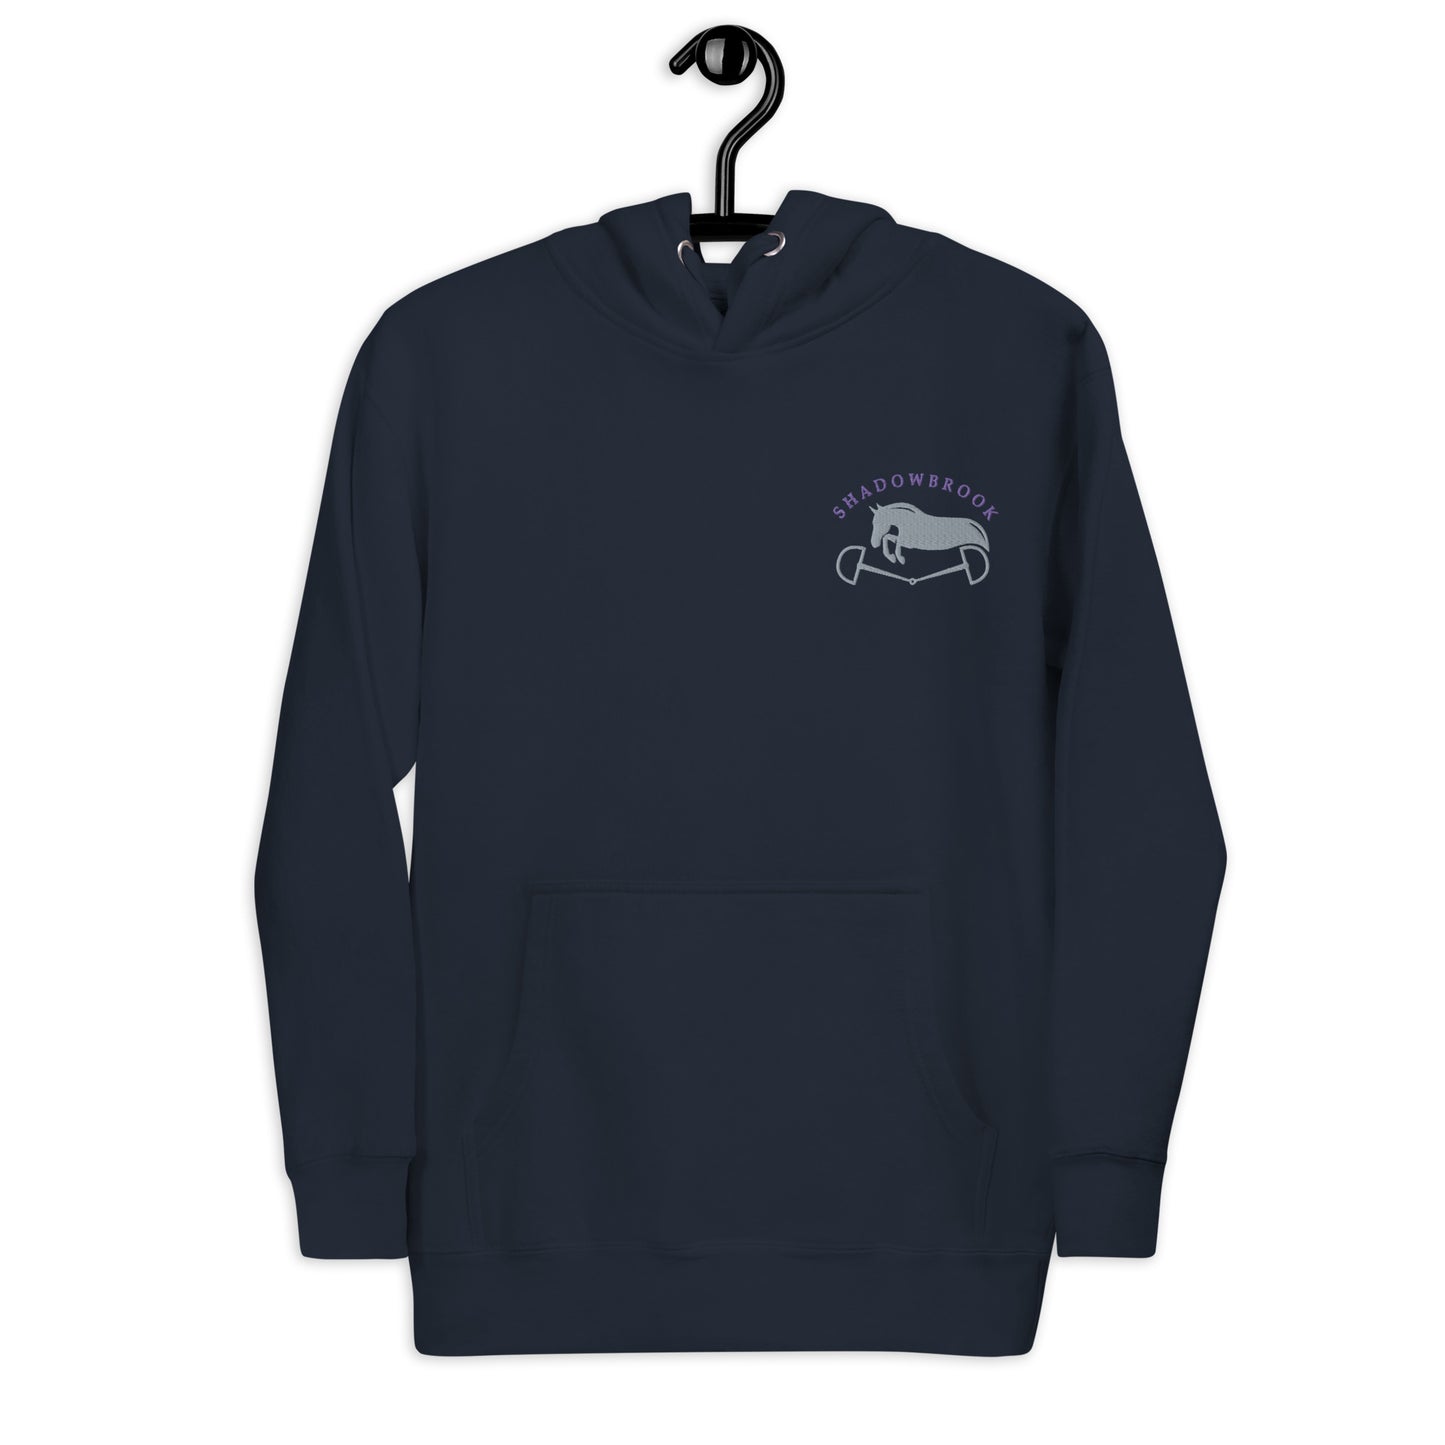 Shadowbrook Stables Navy Unisex Hoodie - Small Logo Front